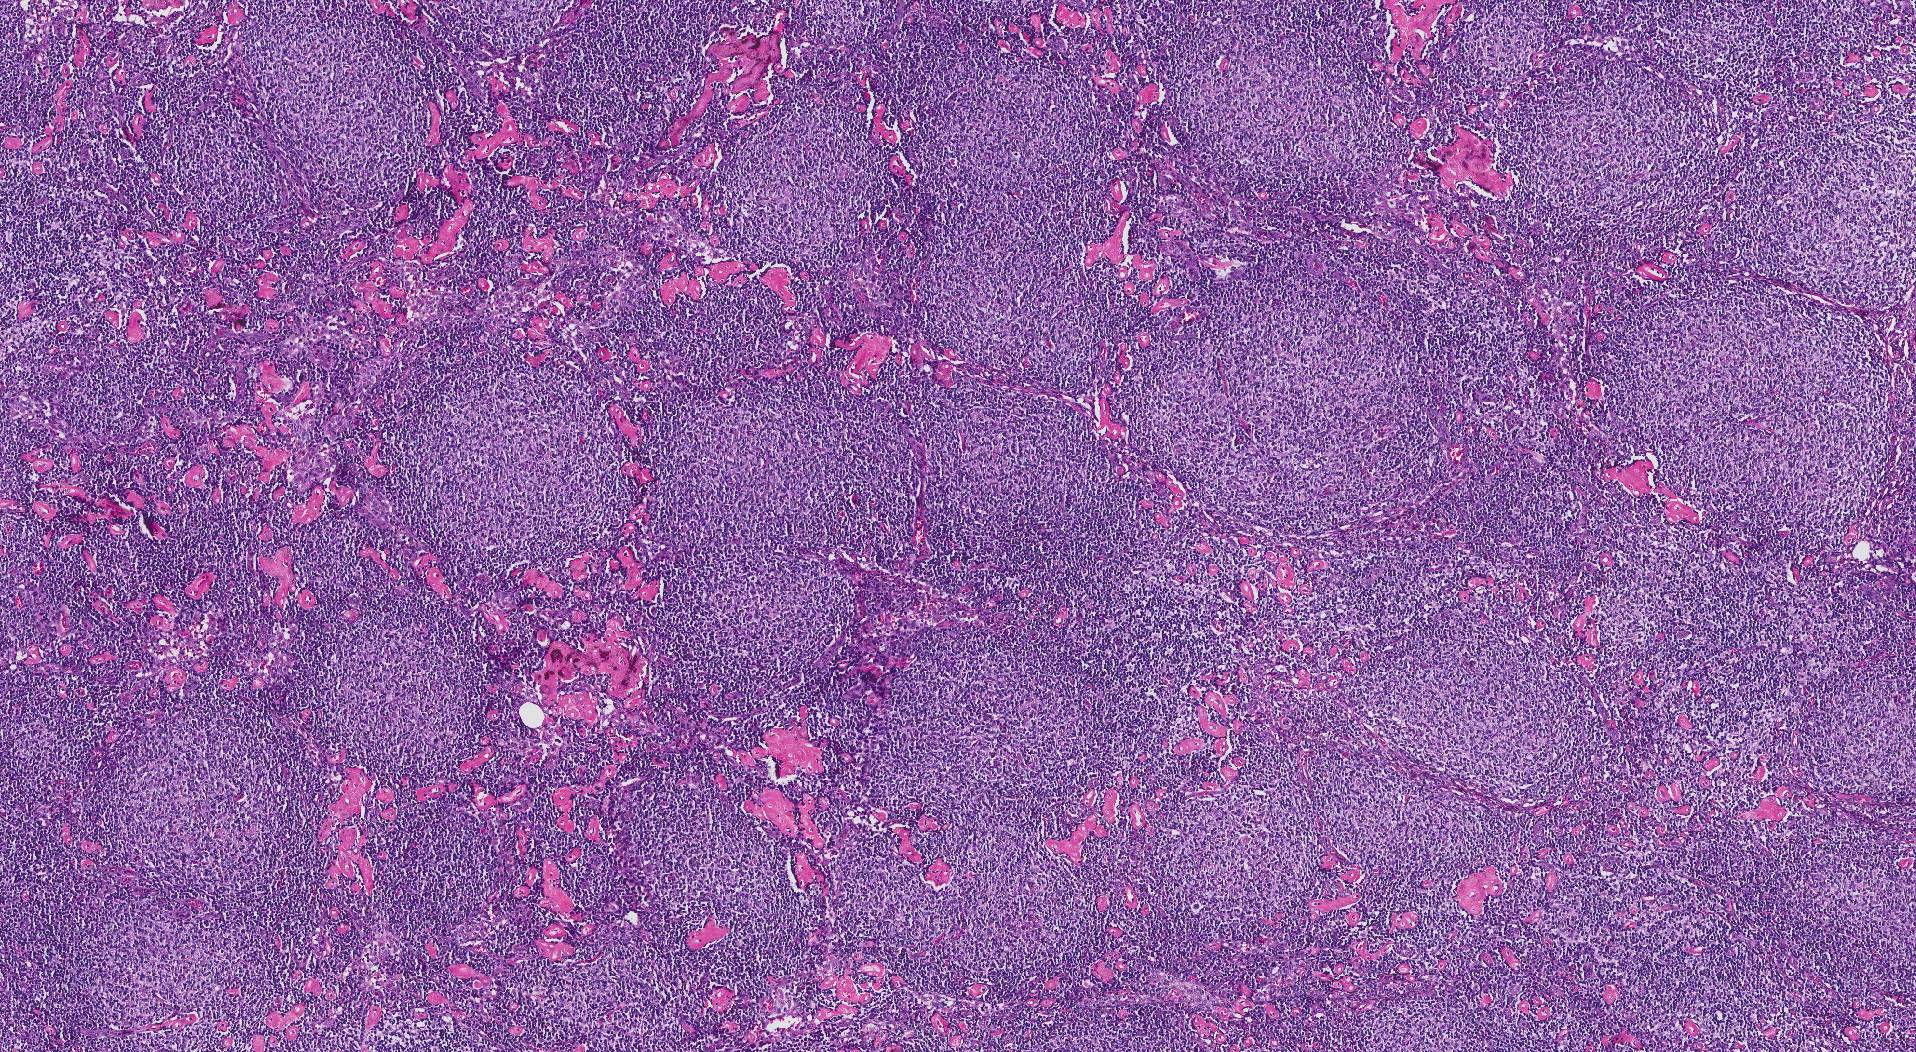 Follicular lymphoma. The small round structures seen in this picture are follicles made up of tumour cells.